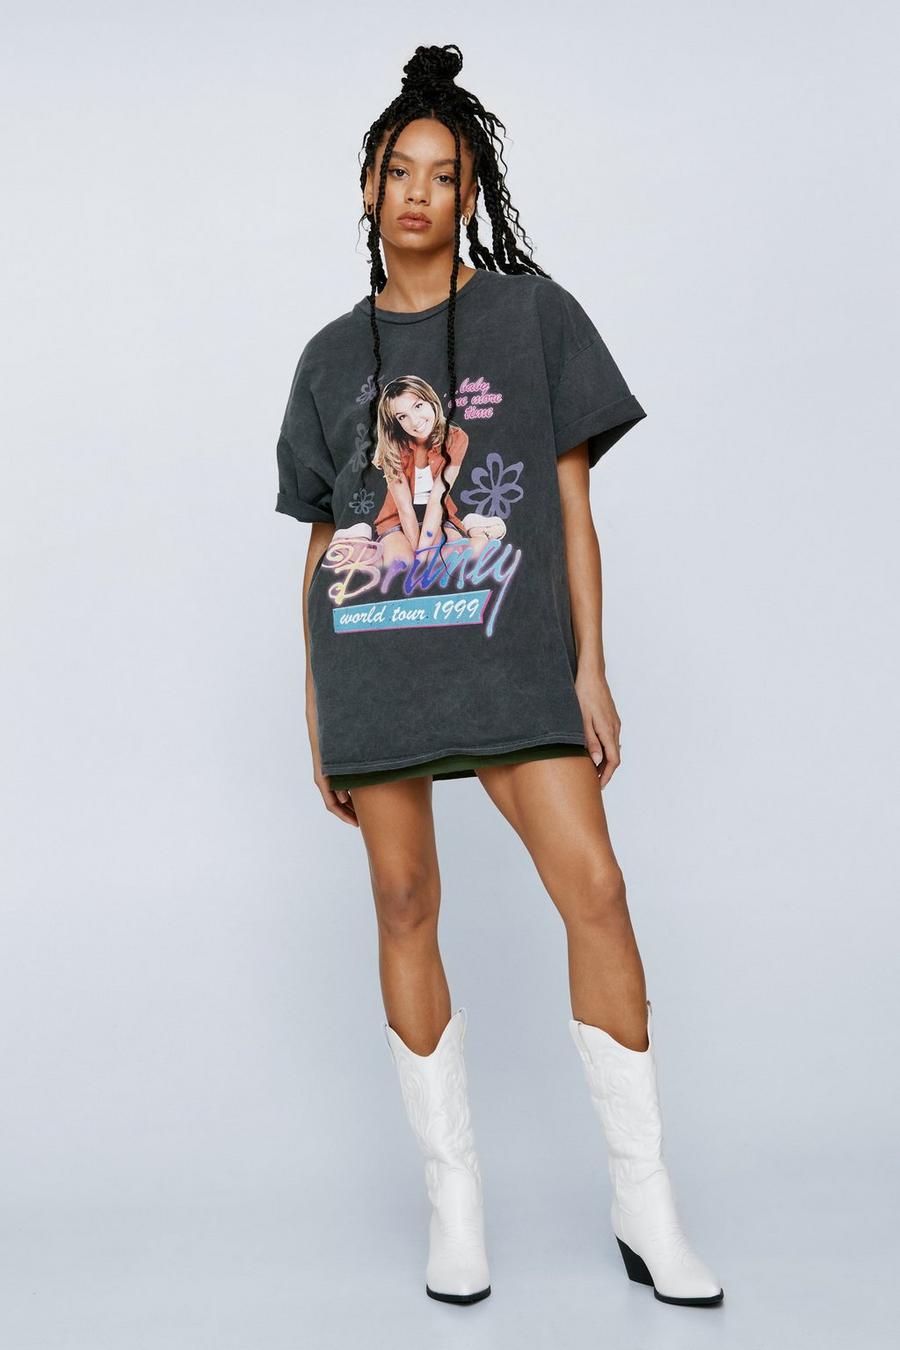 Britney Spears Tour Extreme Oversized Graphic T-Shirt